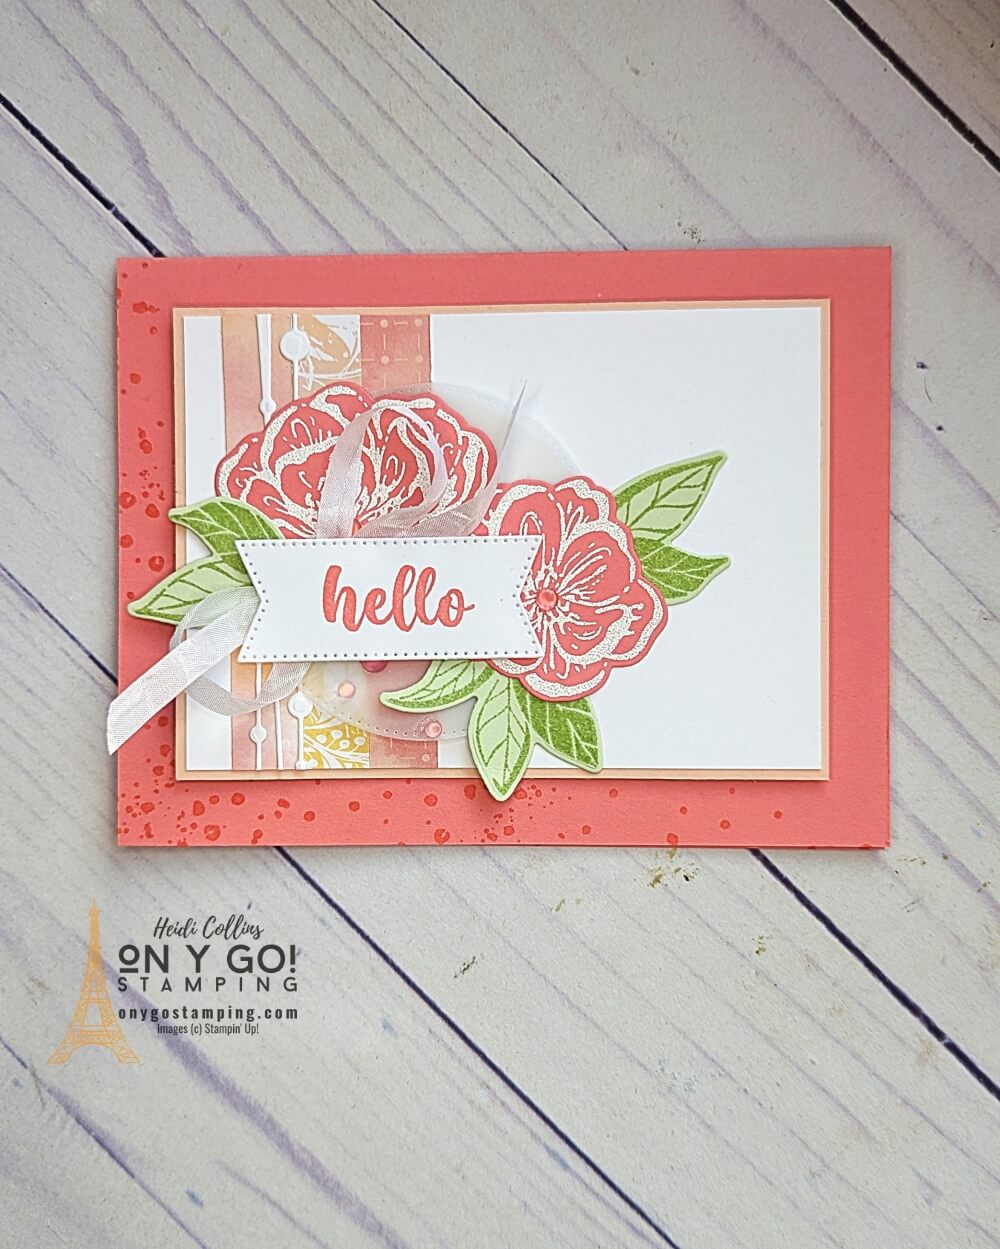 Welcome to the Irresistible Blooms stamp set from Stampin' Up!, a specially picked collection of patterned paper, stamps and more that will help you create the perfect handmade card. This unique stamp set includes an array of beautiful floral motifs, each one individually chosen to make sure that your card stands out from the crowd. With high-quality, vibrant colors and stylish patterns, the Irresistible Blooms stamp set is the perfect way to show someone special how much you care.